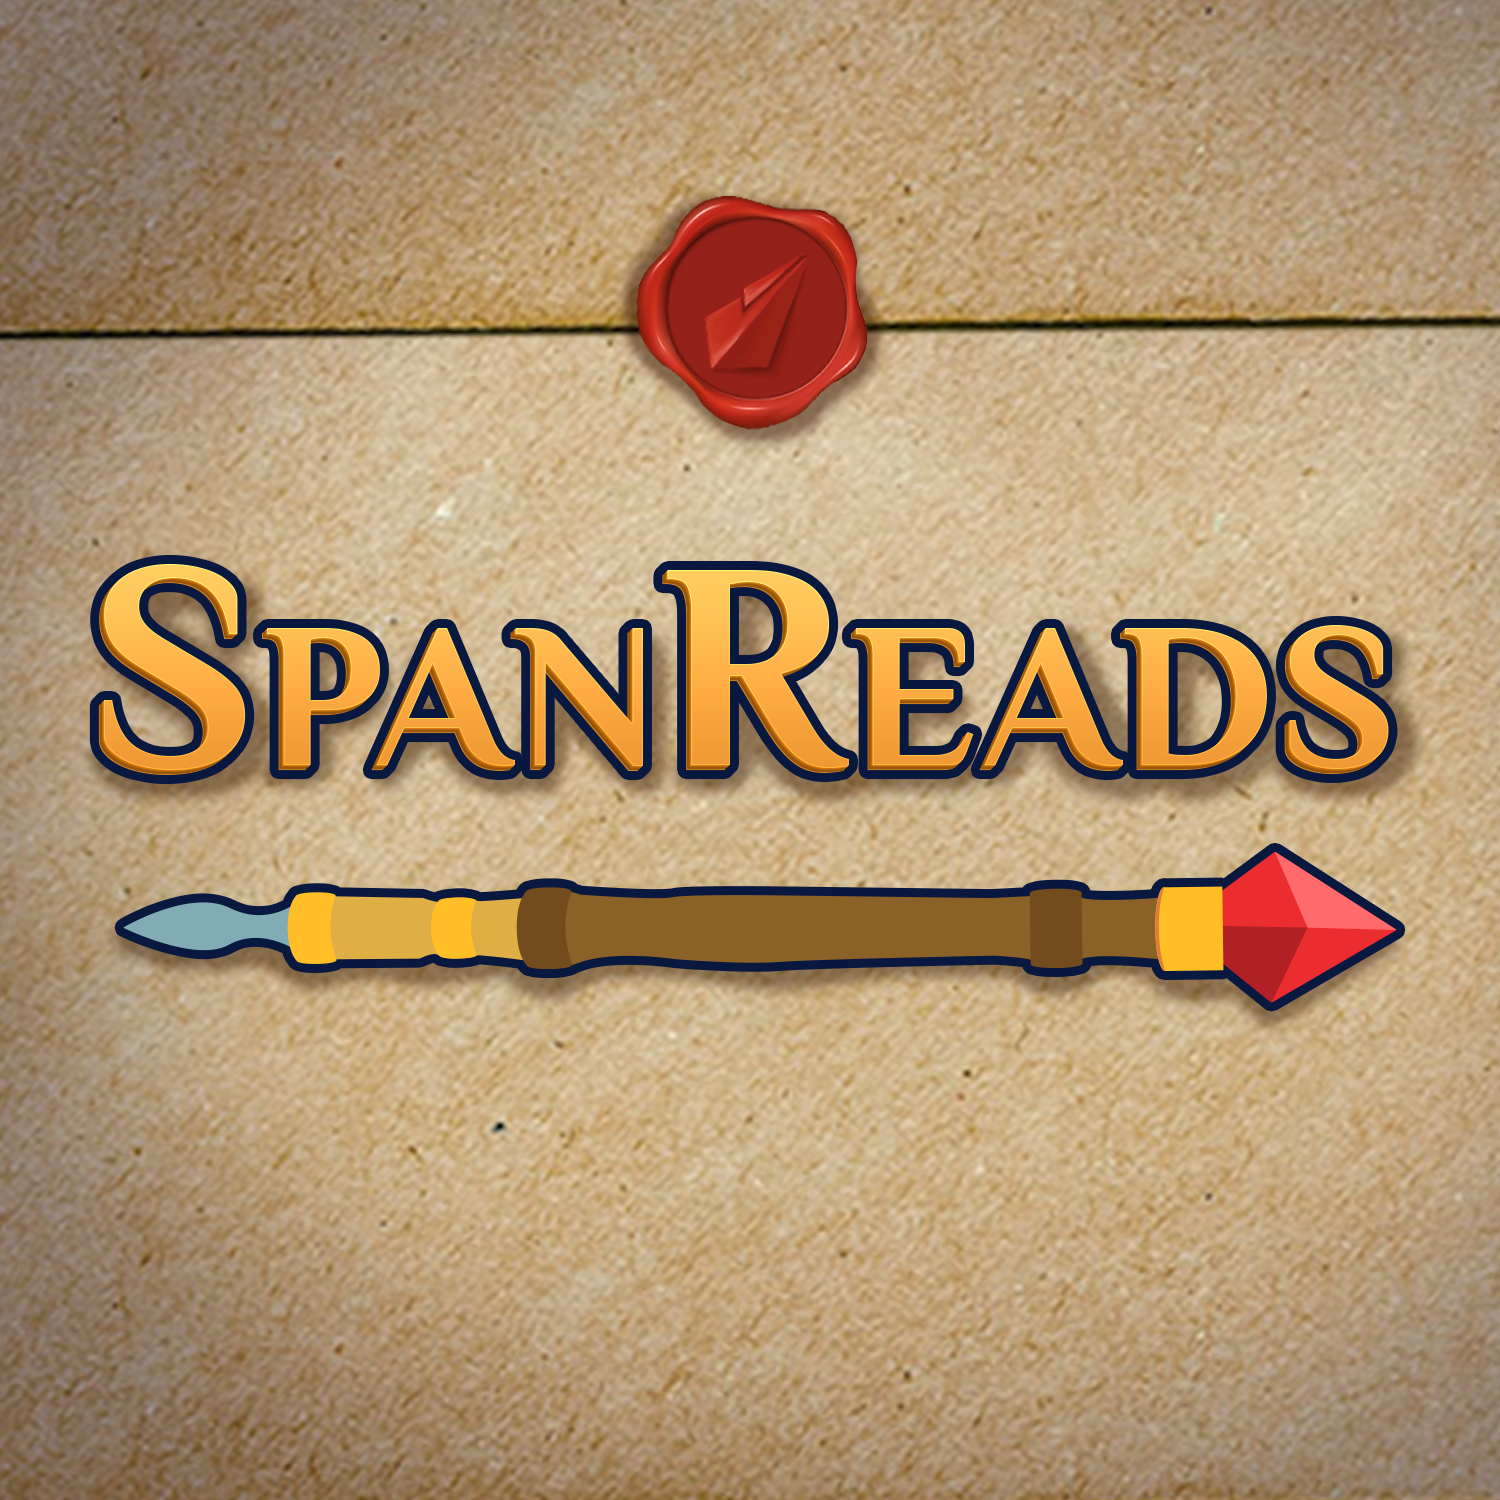 More information about "SpanReads: Shadows of Self - Cosmere Implications"